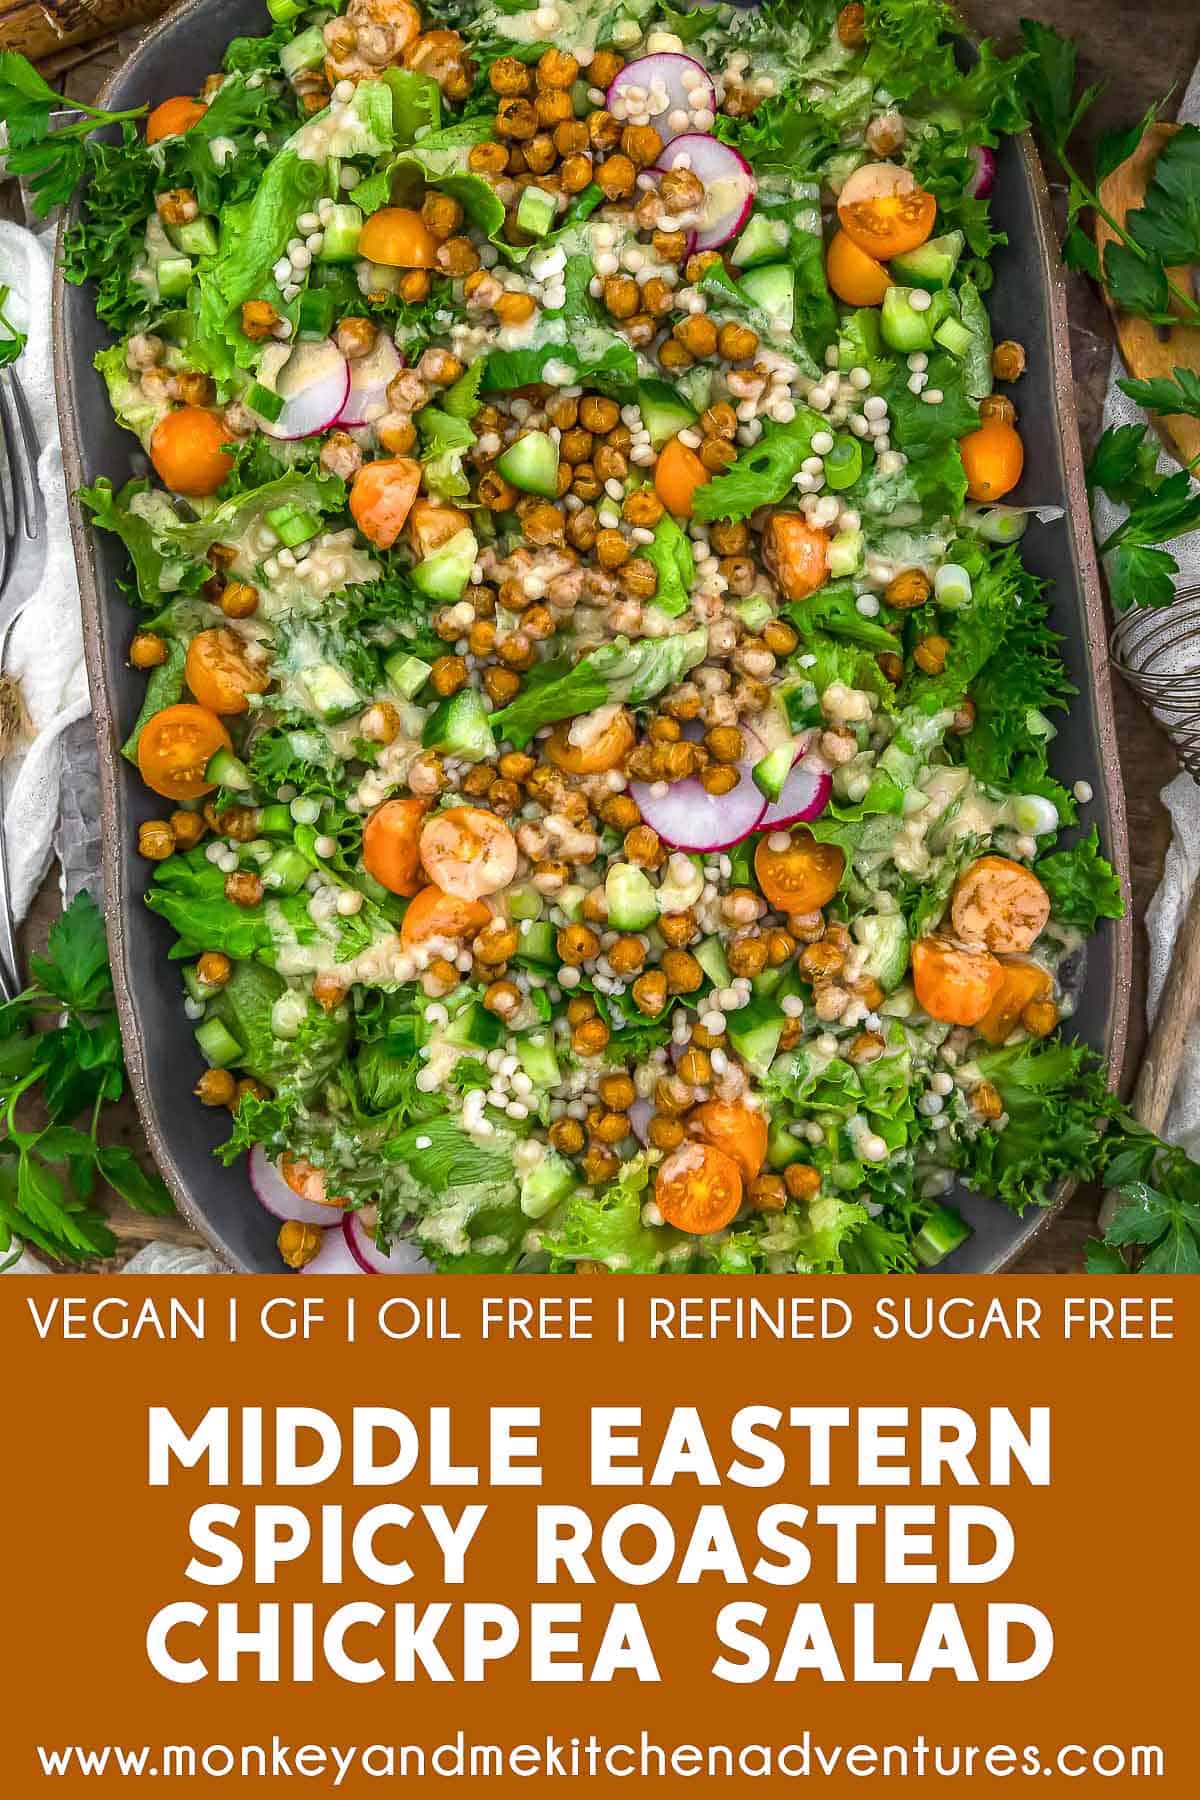 Middle Eastern Spicy Roasted Chickpea Salad with text description